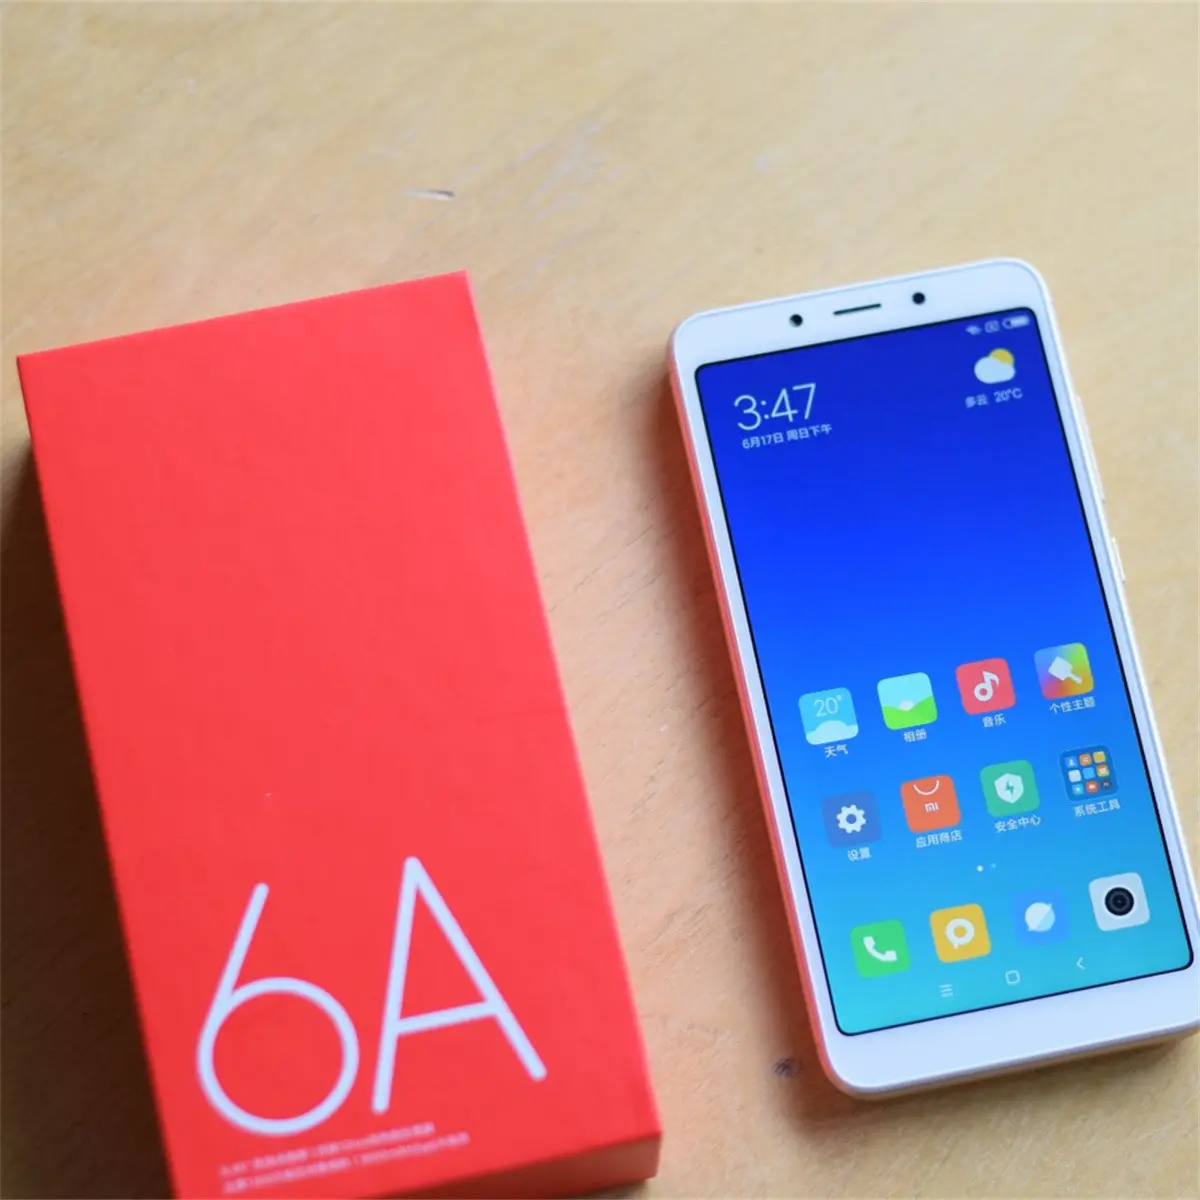 Used Android Mobile Phones, Dual SIM, Second Hand, Used, Xiaomi Redmi 6A, RAM 3 ГБ + 32 ГБ, G, Cheap Price, 100% Original